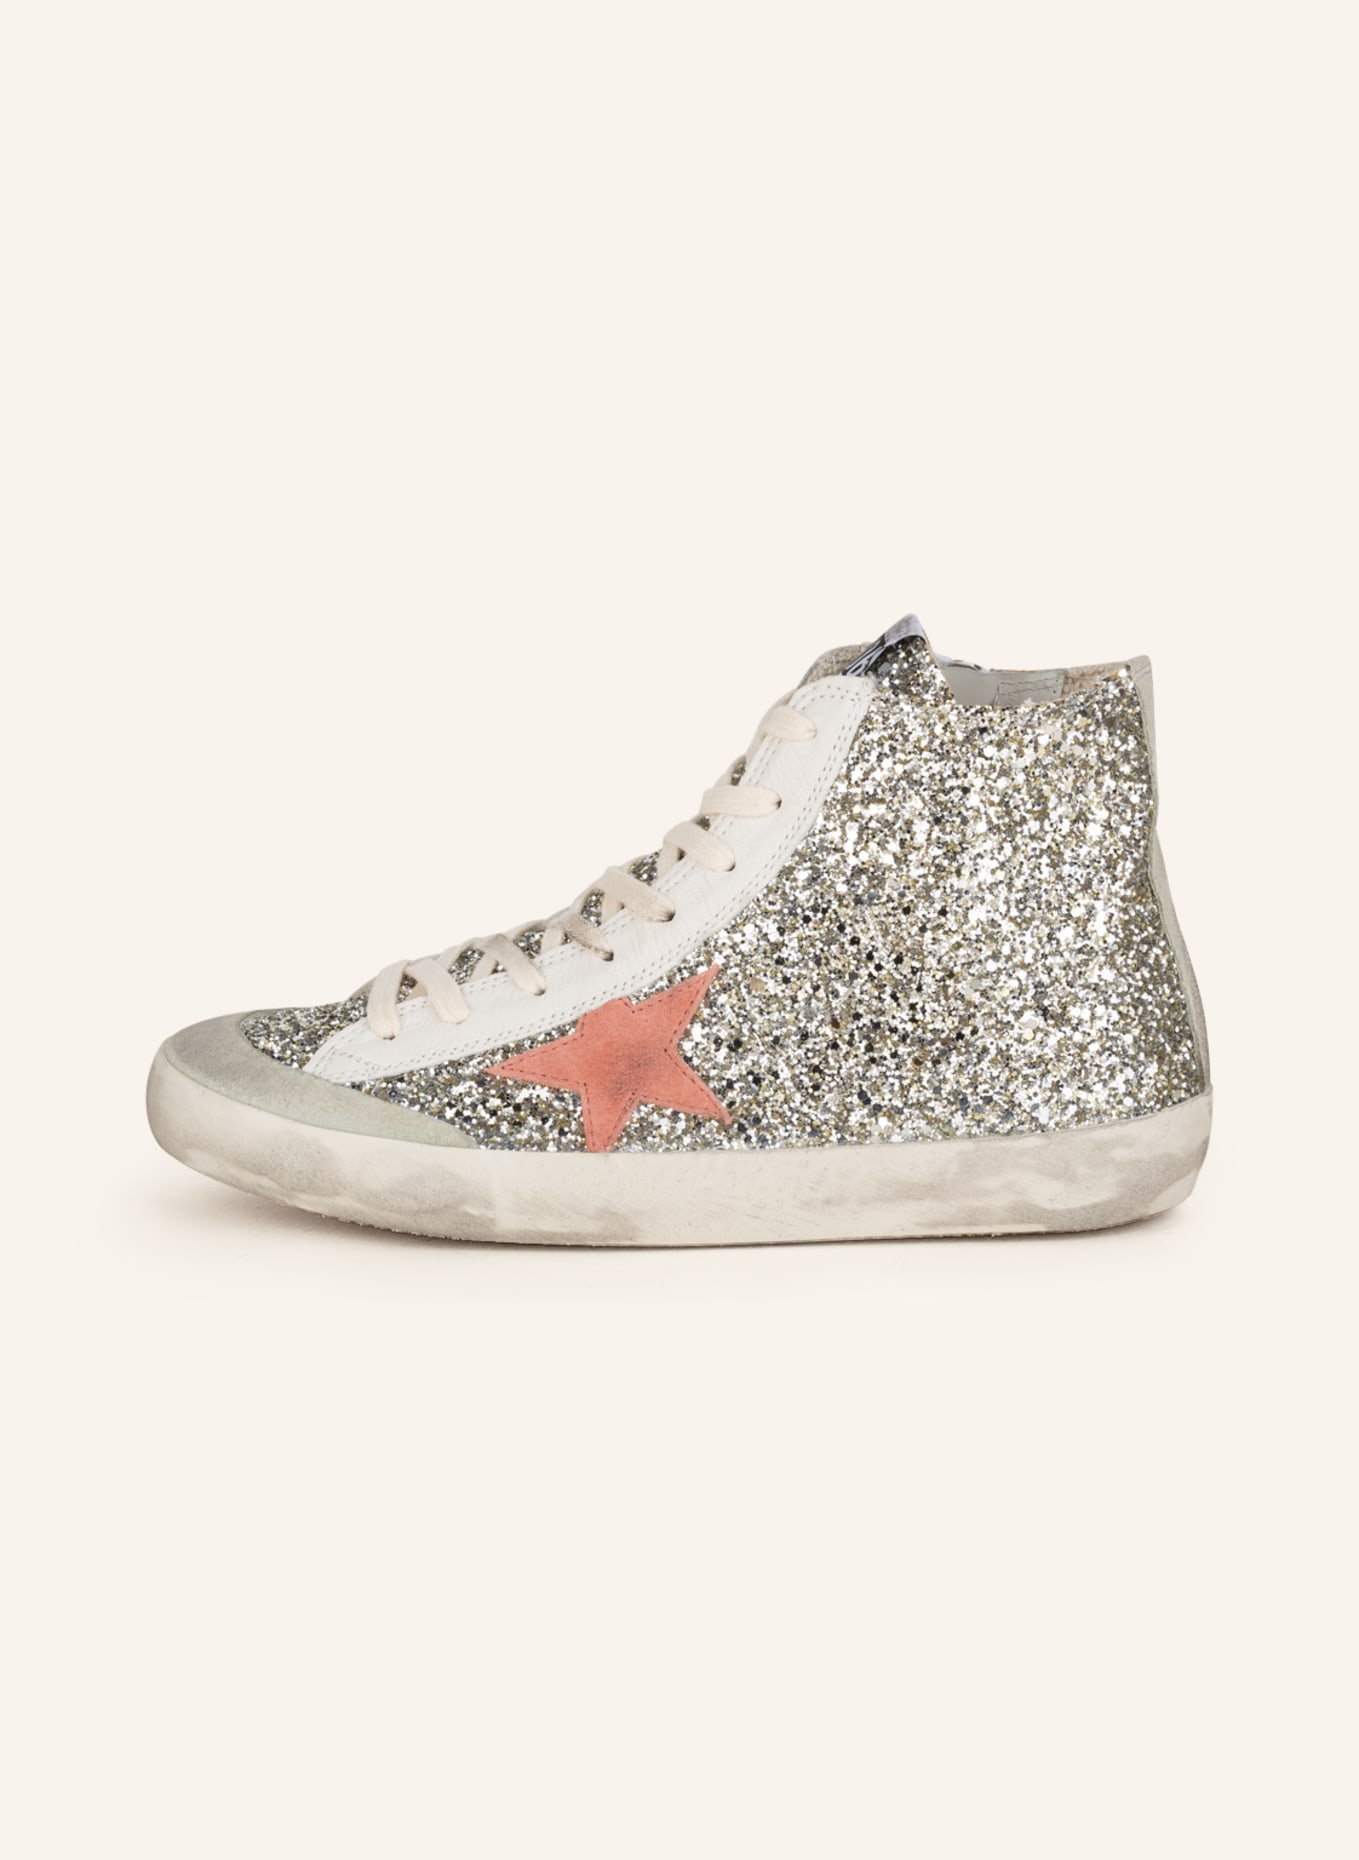 GOLDEN GOOSE High-top sneakers FRANCY PENSTAR, Color: WHITE GOLD/ WHITE/ ROSE (Image 4)